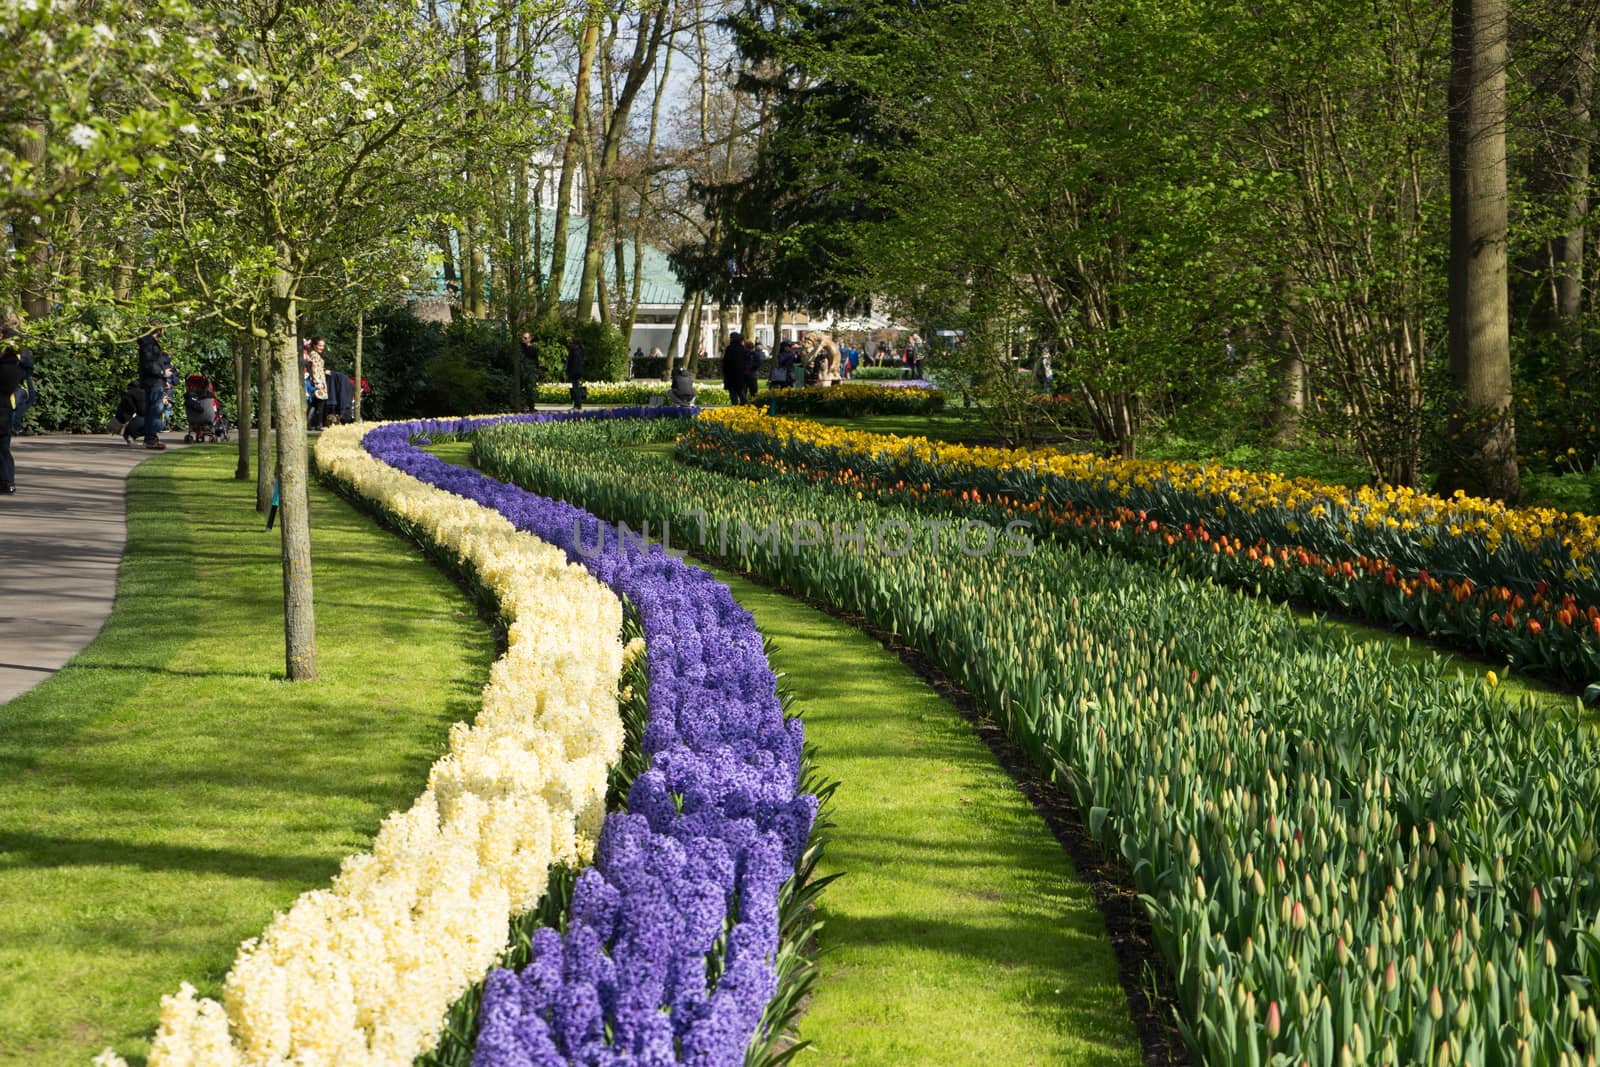 Row of tulips and hyacinth at a garden in Lisse, Netherlands, Europe on a bright summaer spring day